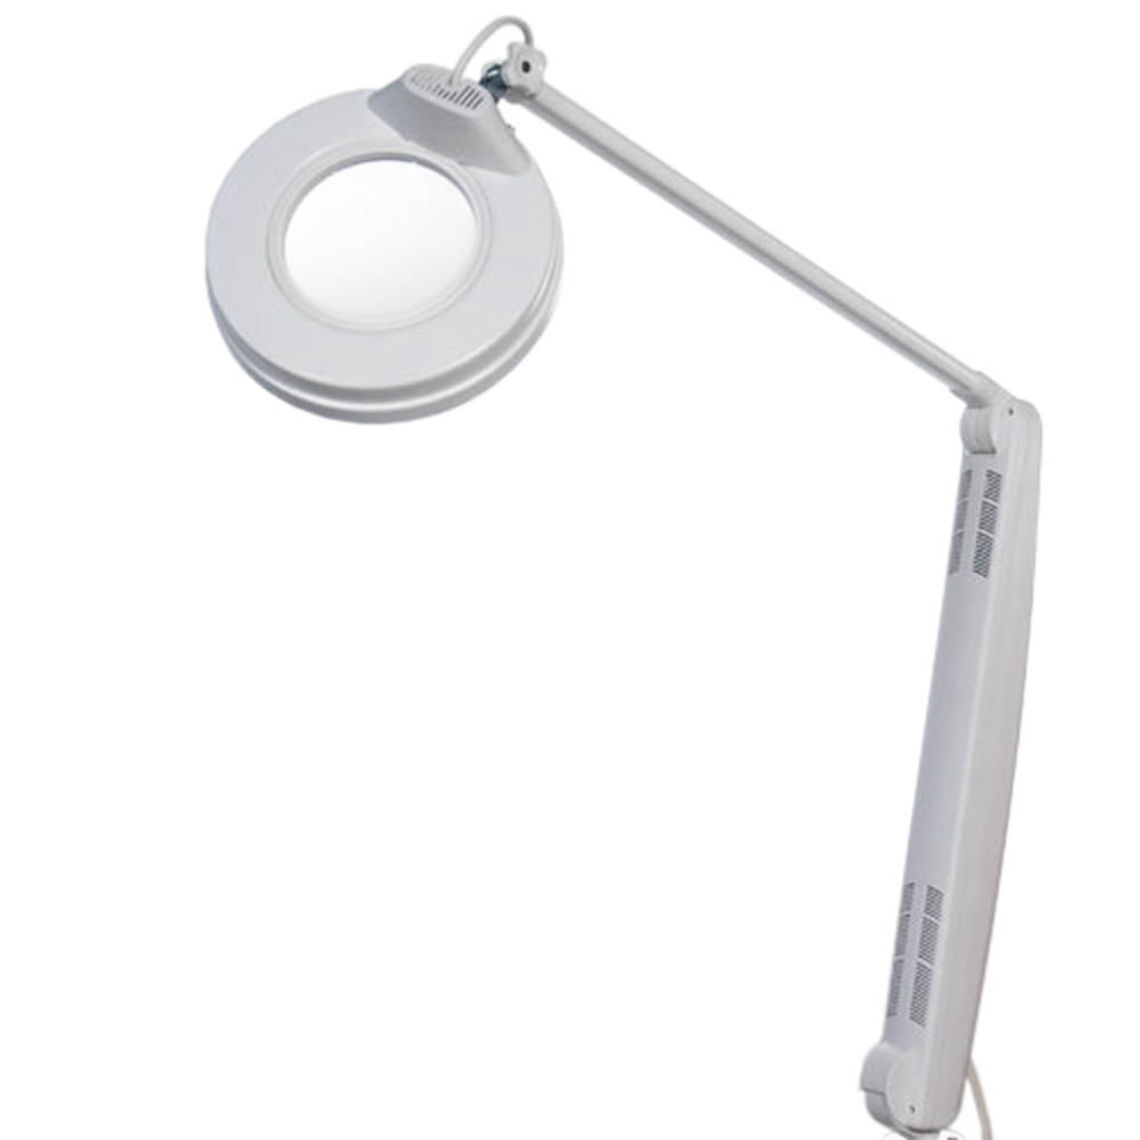 Magnifying Lamp Deluxe NEO LED White, 3.5 Diopter